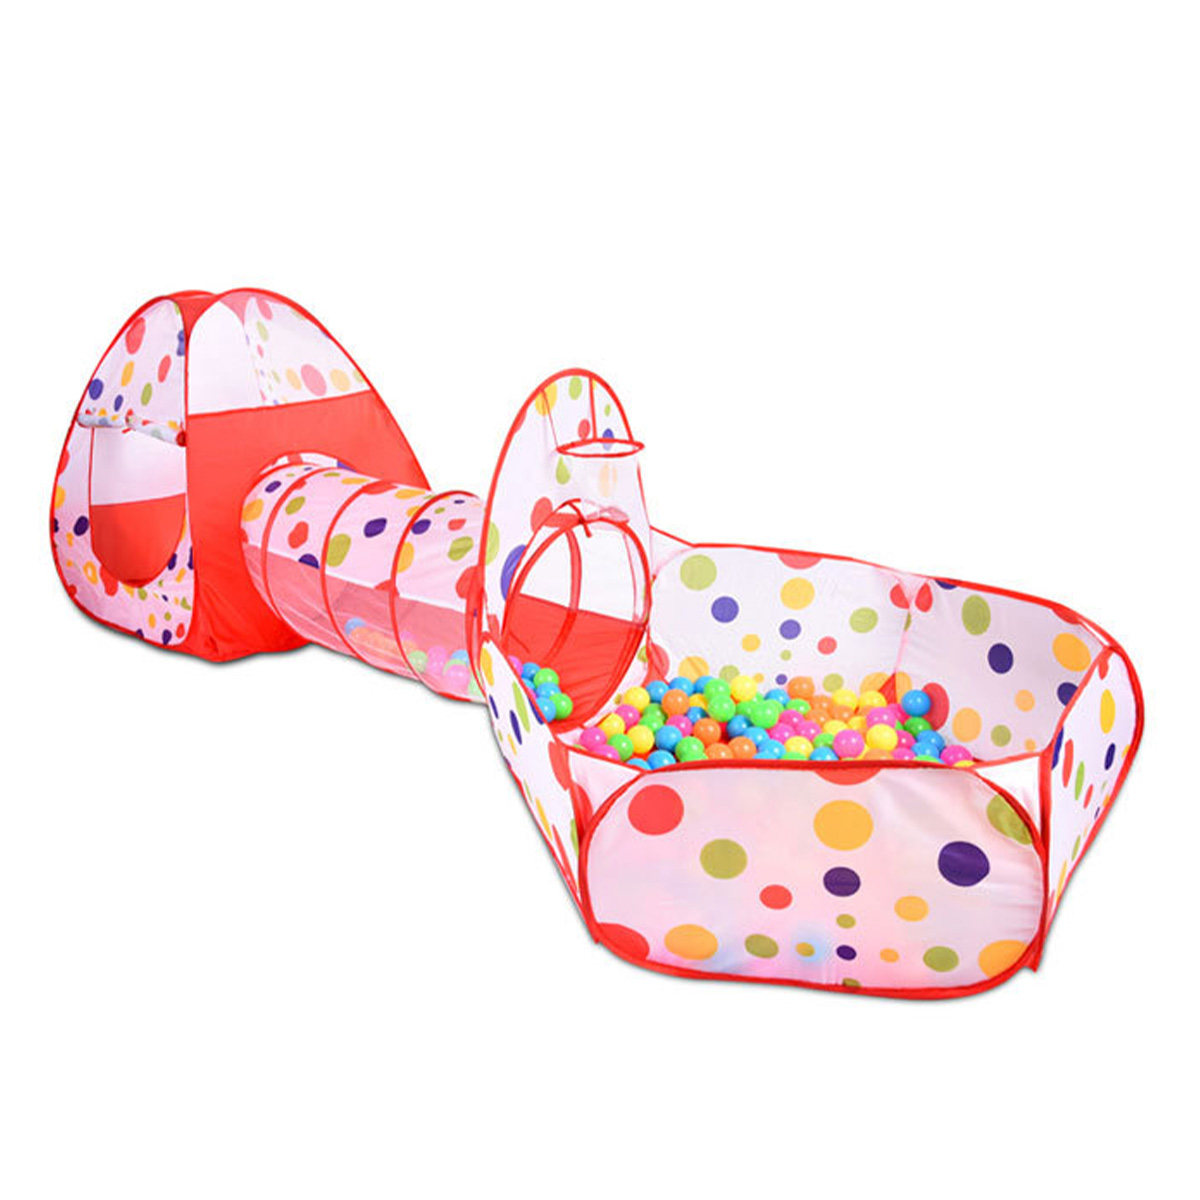 Baby-Creeping-Tunnel-Tent-Play-Game-Toys-for-0-3-Year-Old-Kids-Perfect-Gift-1676970-10